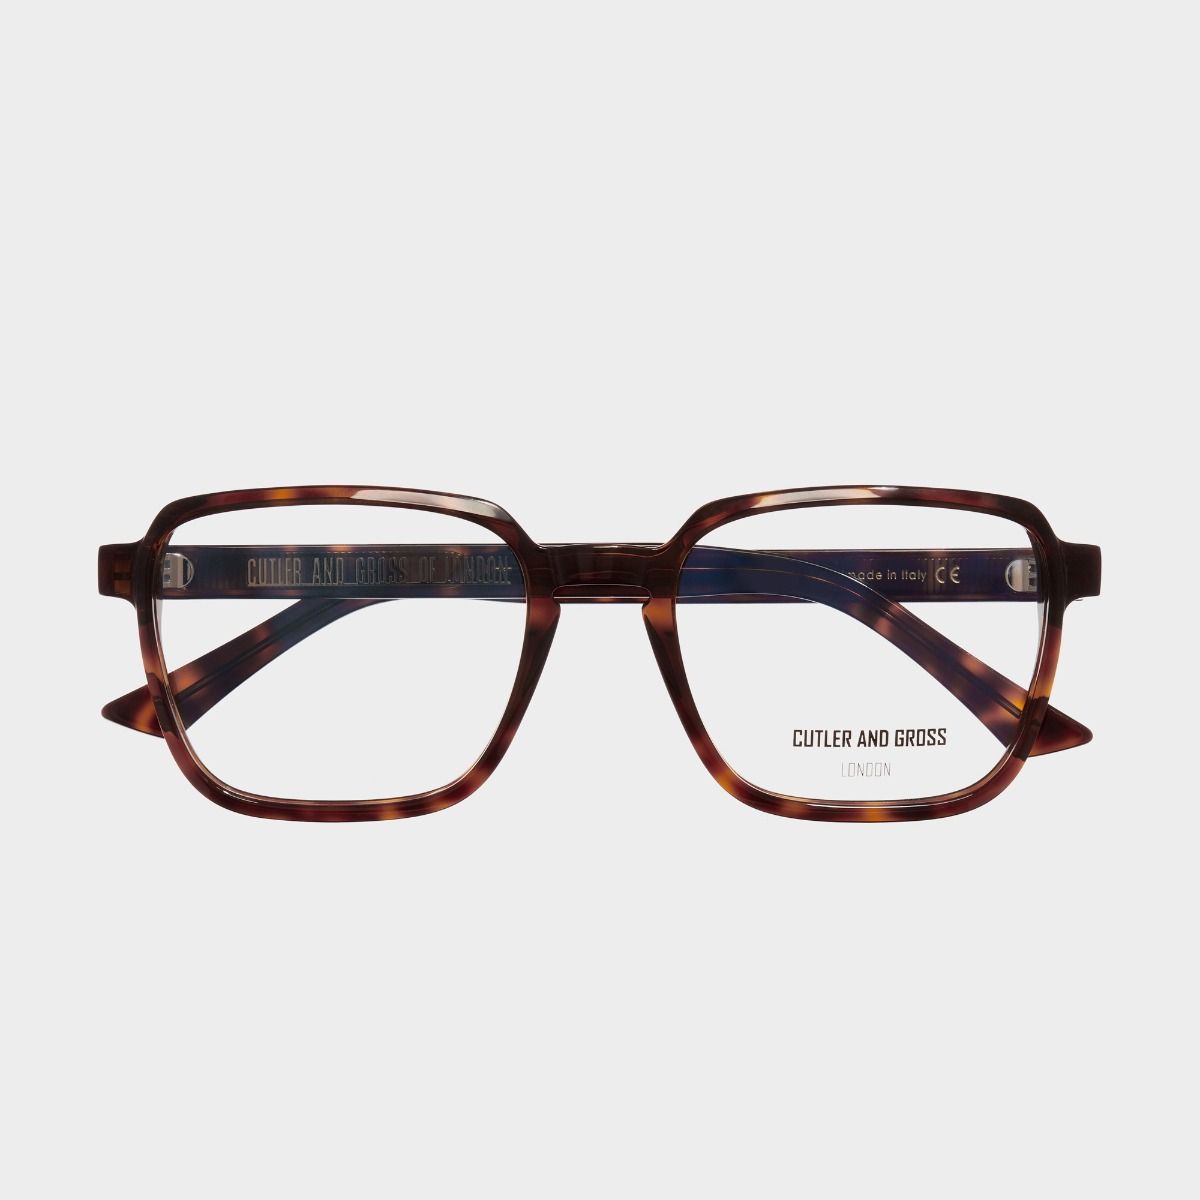 Cutler and Gross, 1361 Optical Square Glasses - Dark Turtle